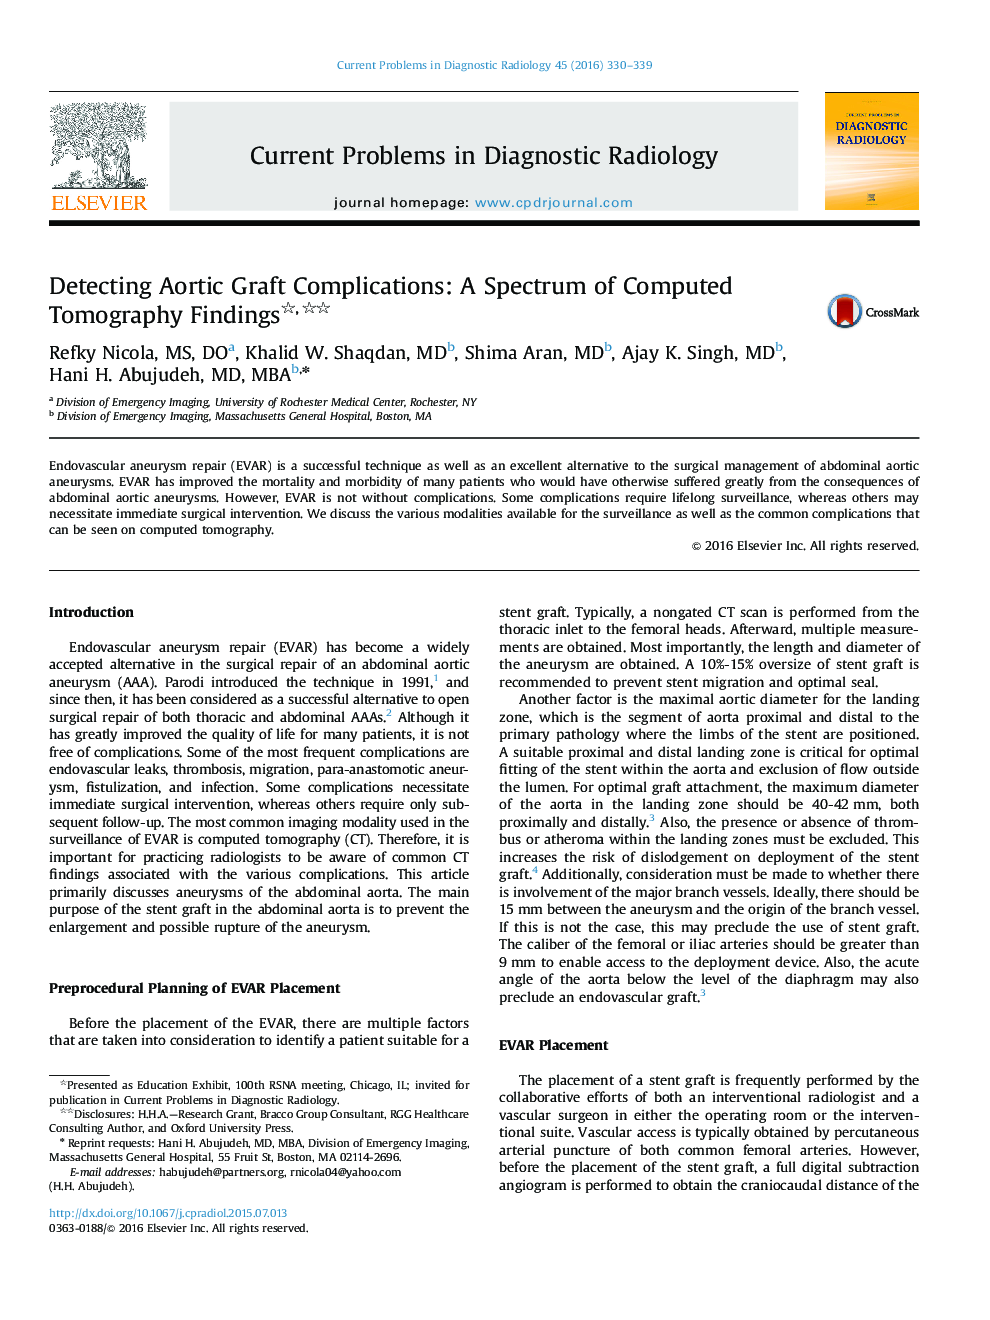 Detecting Aortic Graft Complications: A Spectrum of Computed Tomography Findings 